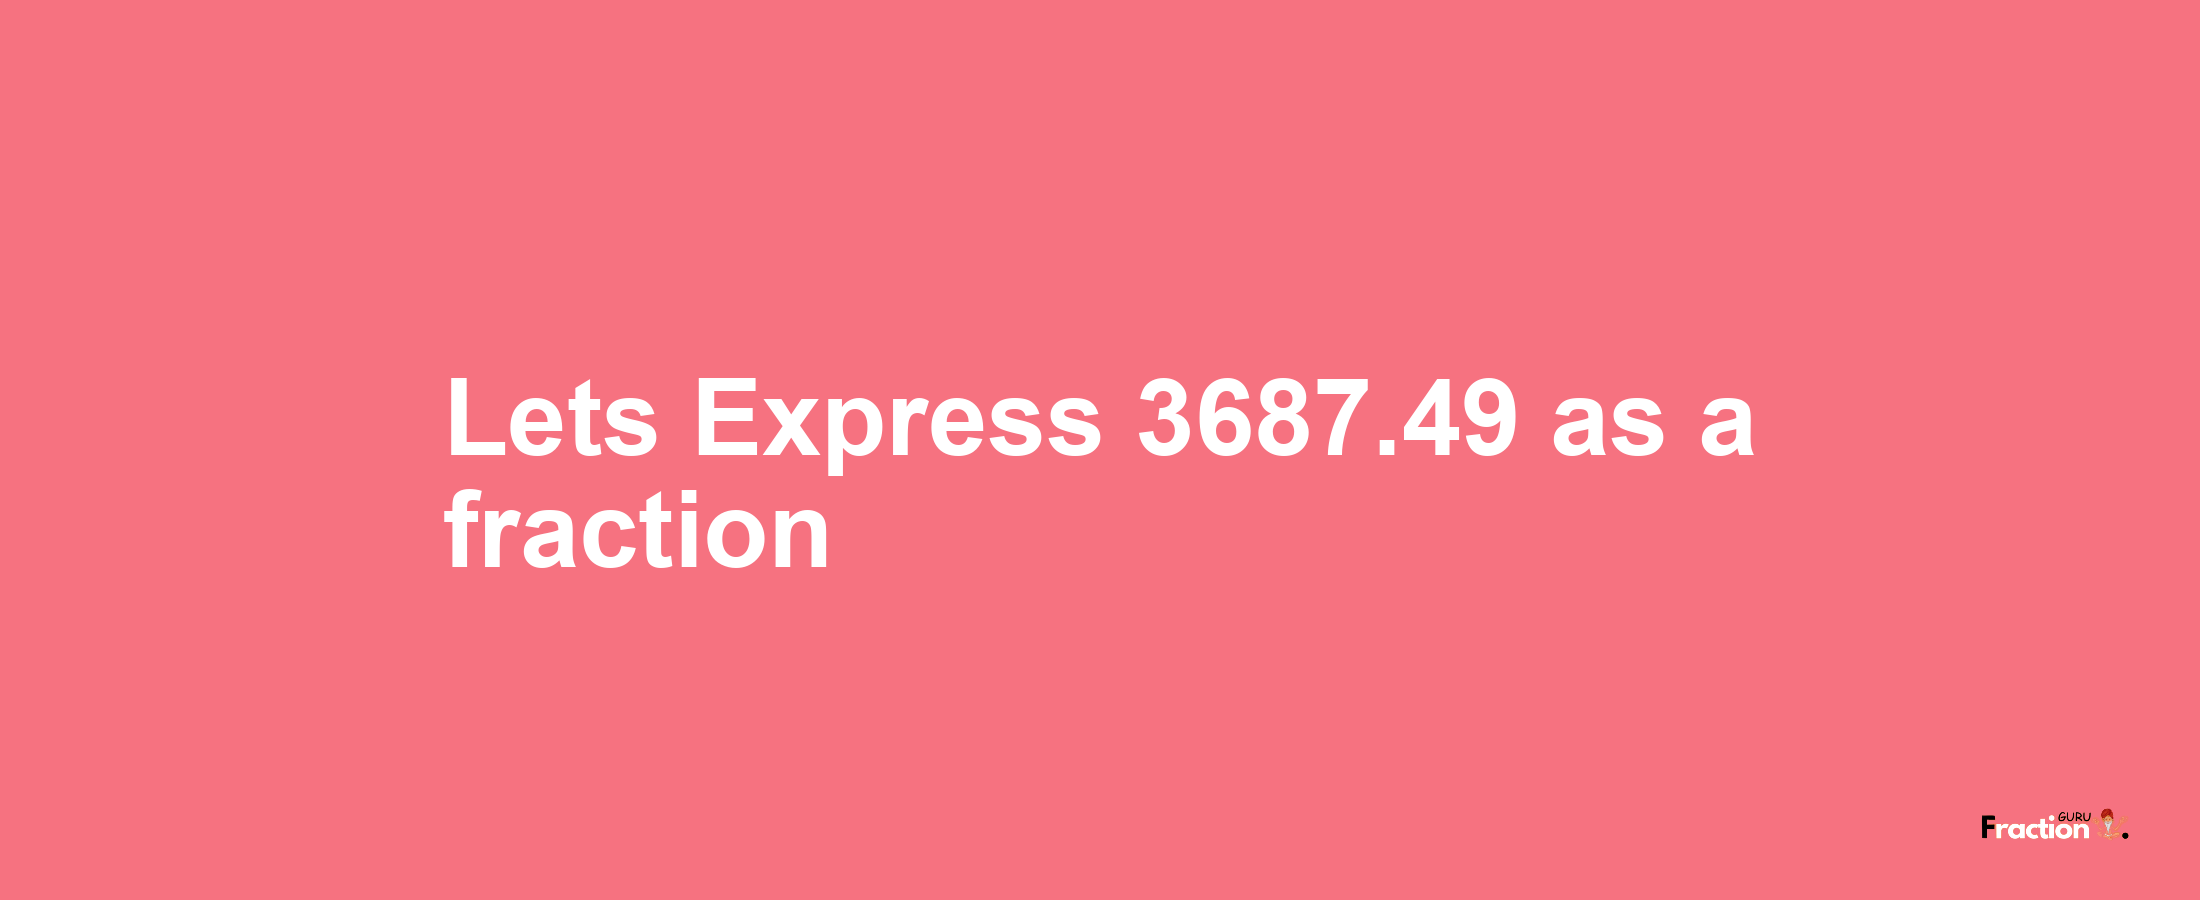 Lets Express 3687.49 as afraction